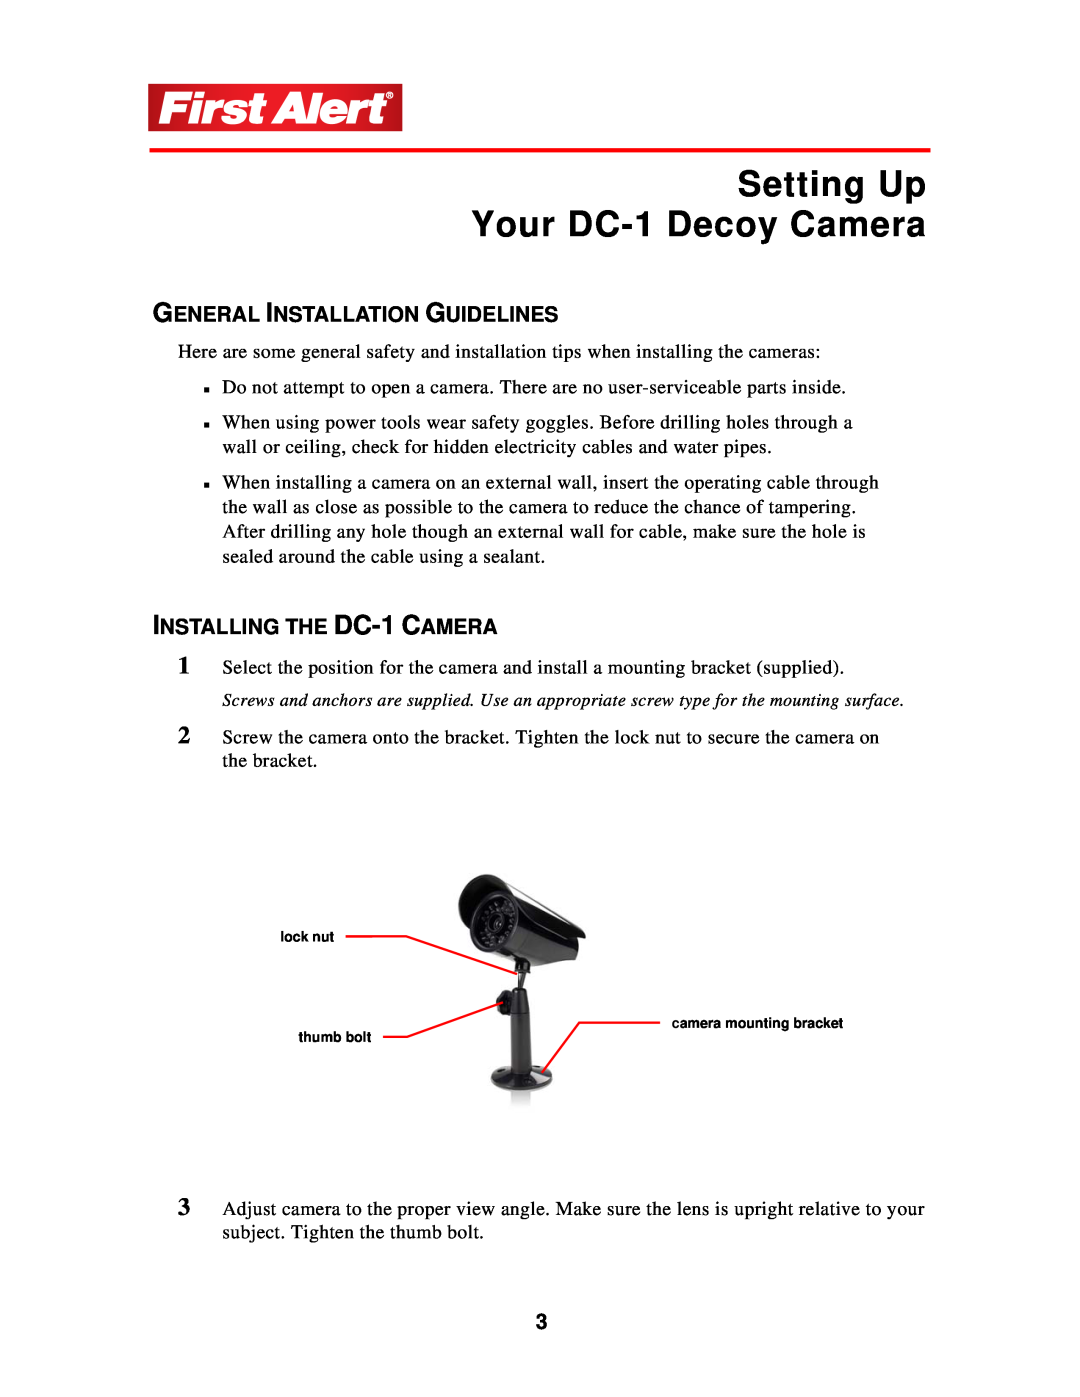 First Alert user manual Setting Up Your DC-1 Decoy Camera, General Installation Guidelines, INSTALLING THE DC-1 CAMERA 